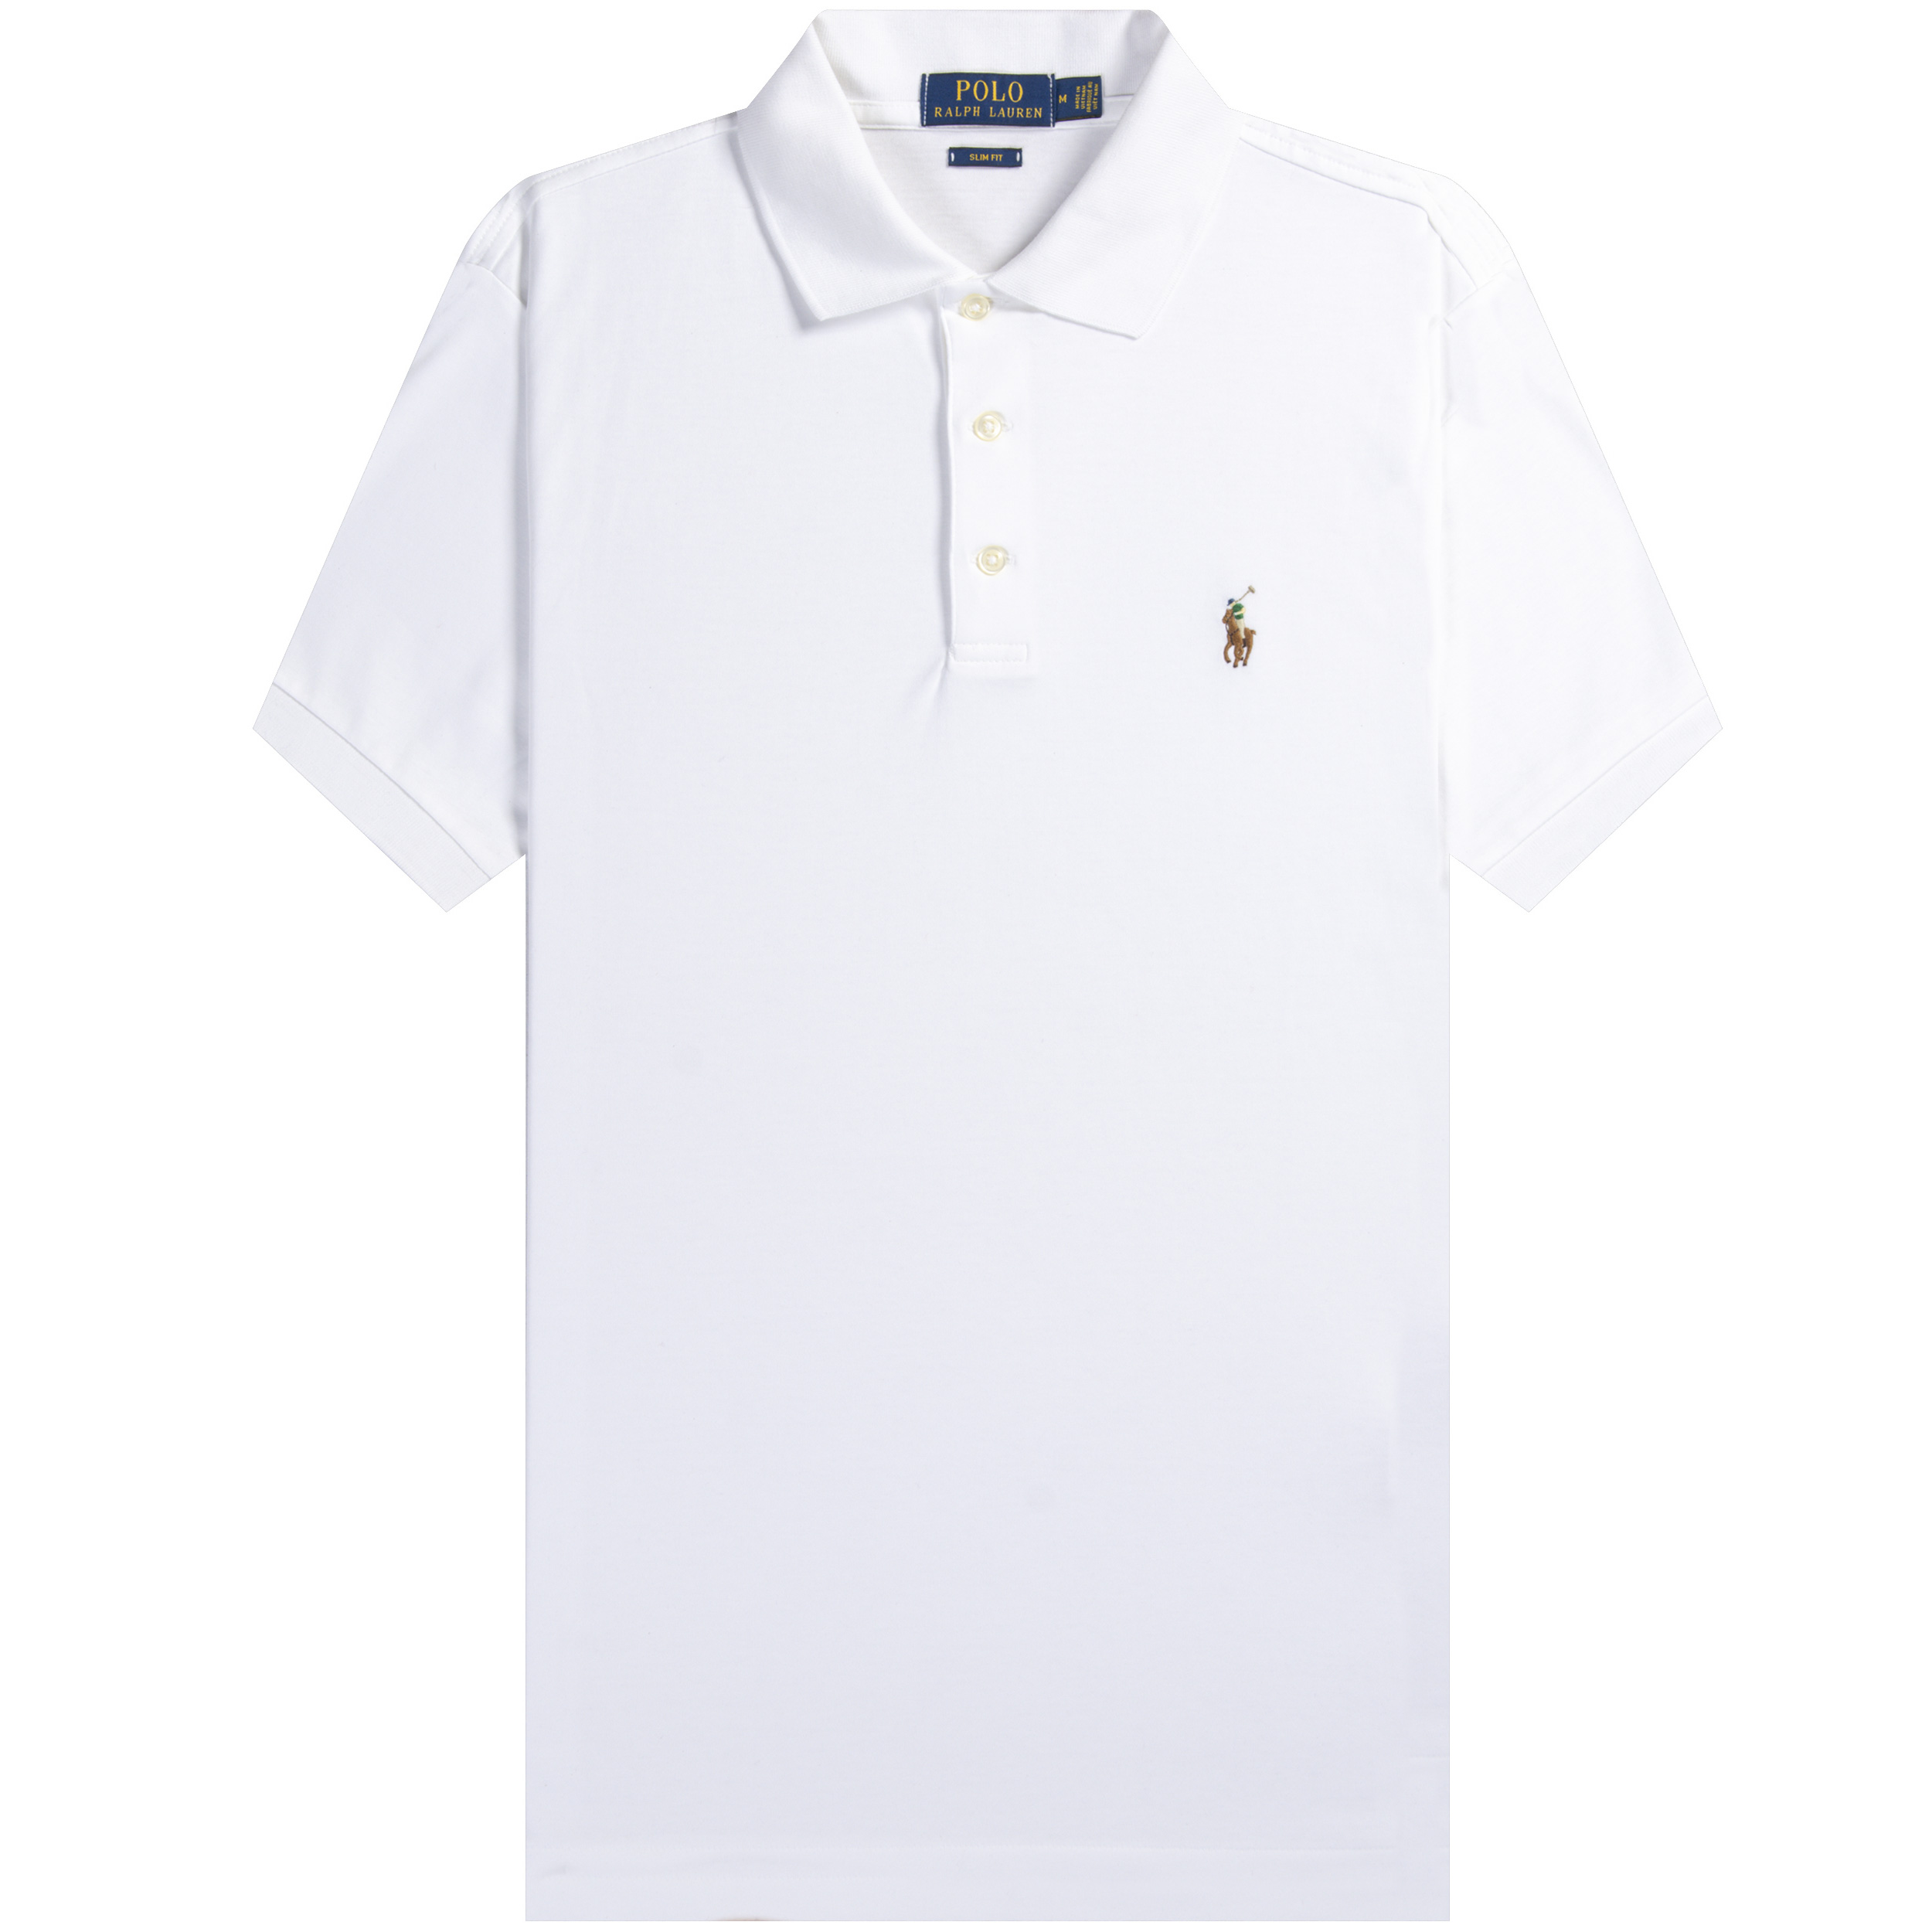 Polo Ralph Lauren Slim Fit Soft Touch Polo White